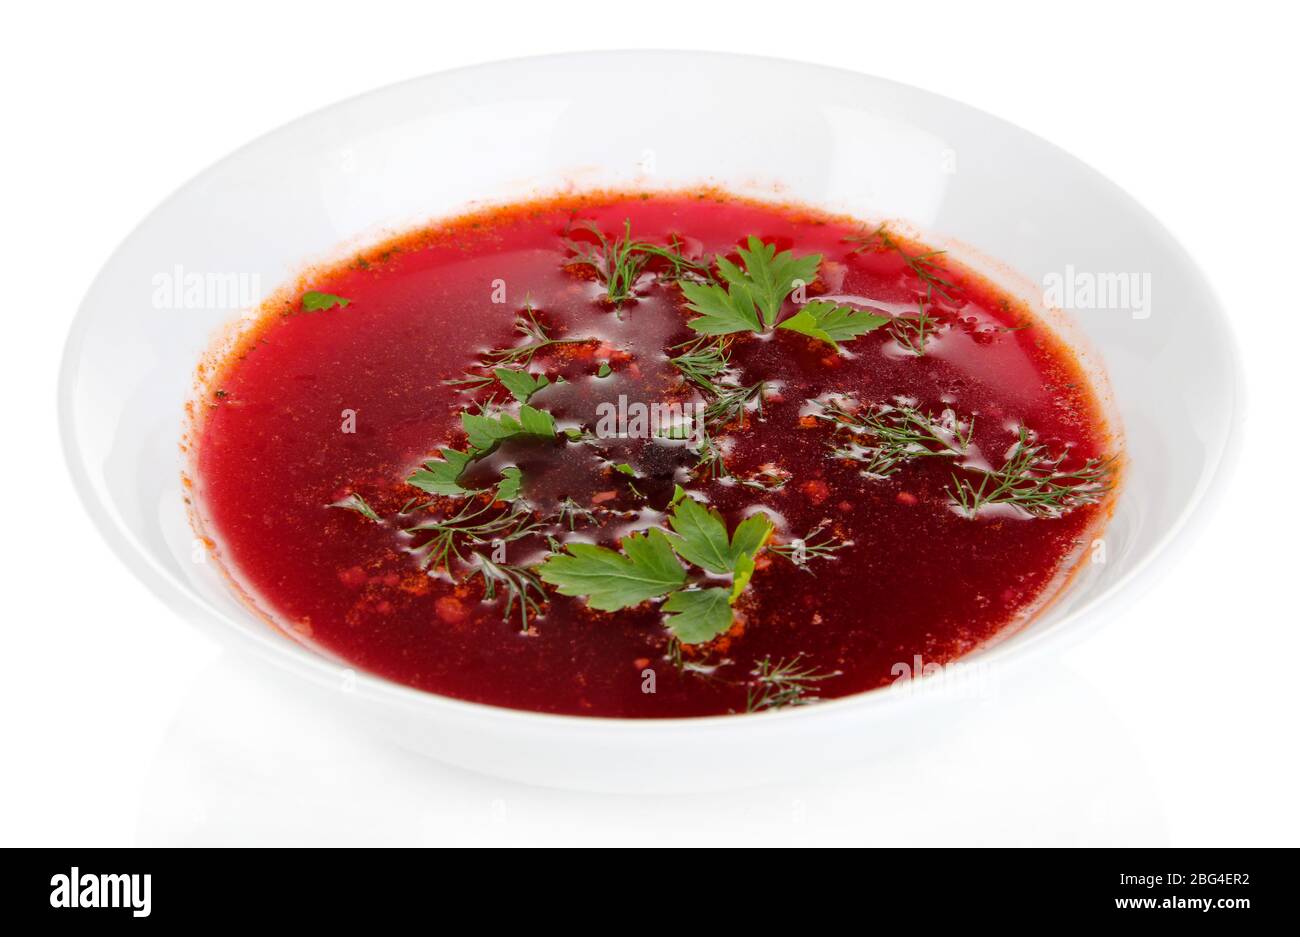 Beet soup, restaurant Cut Out Stock Images & Pictures - Page 2 - Alamy